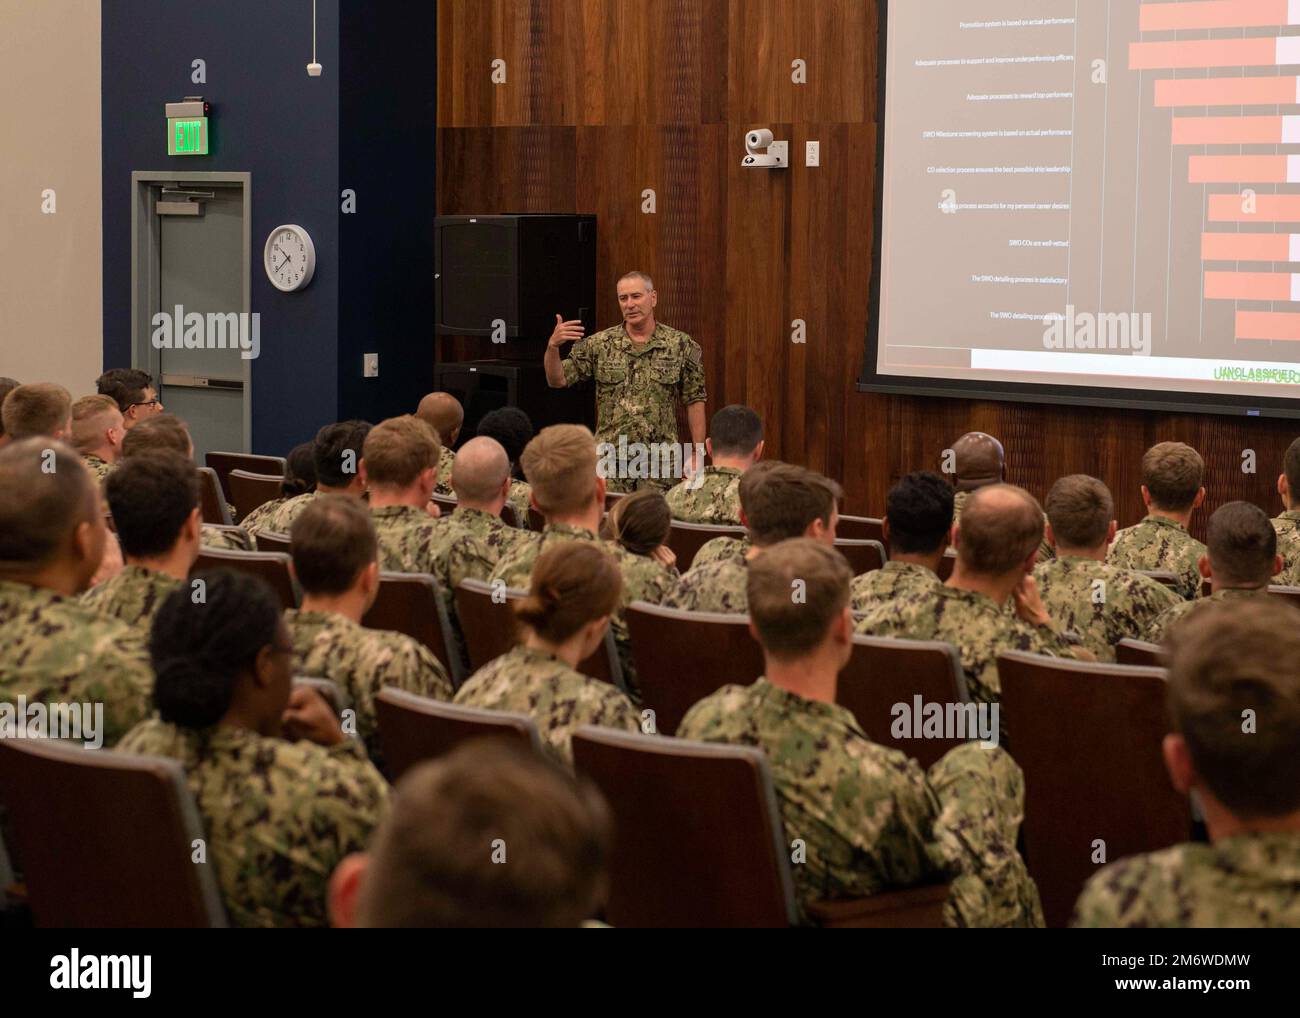 SAN DIEGO (May 6, 2022) – Vice Adm. Roy Kitchener, Commander, Naval Surface Force, U.S. Pacific Fleet, speaks with junior officers at the Mariner Skills Training Center, Pacific (MSTCPAC). Kitchener discussed the results of the Surface Warfare Officer junior officer survey that gathered opinions on retention, perspectives on the Warfare Tactics Instructor program, leadership development and warfighting readiness from more than 2,500 officers O1 to O4. Stock Photo